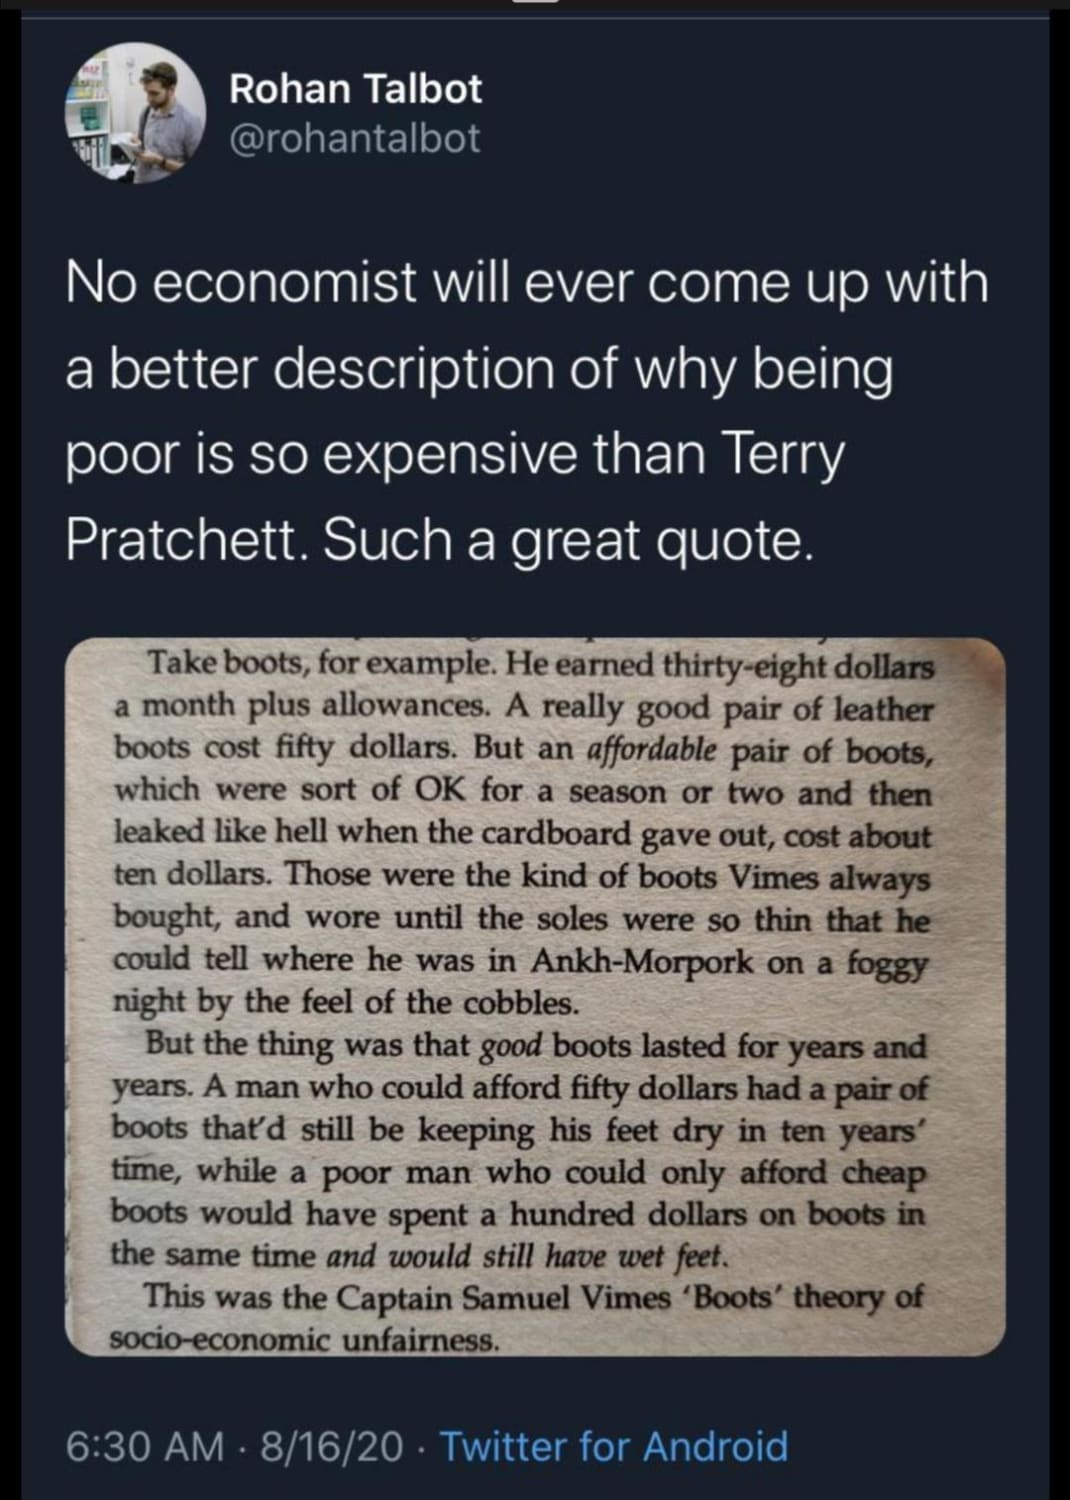 Terry Pratchett on why being poor is expensive